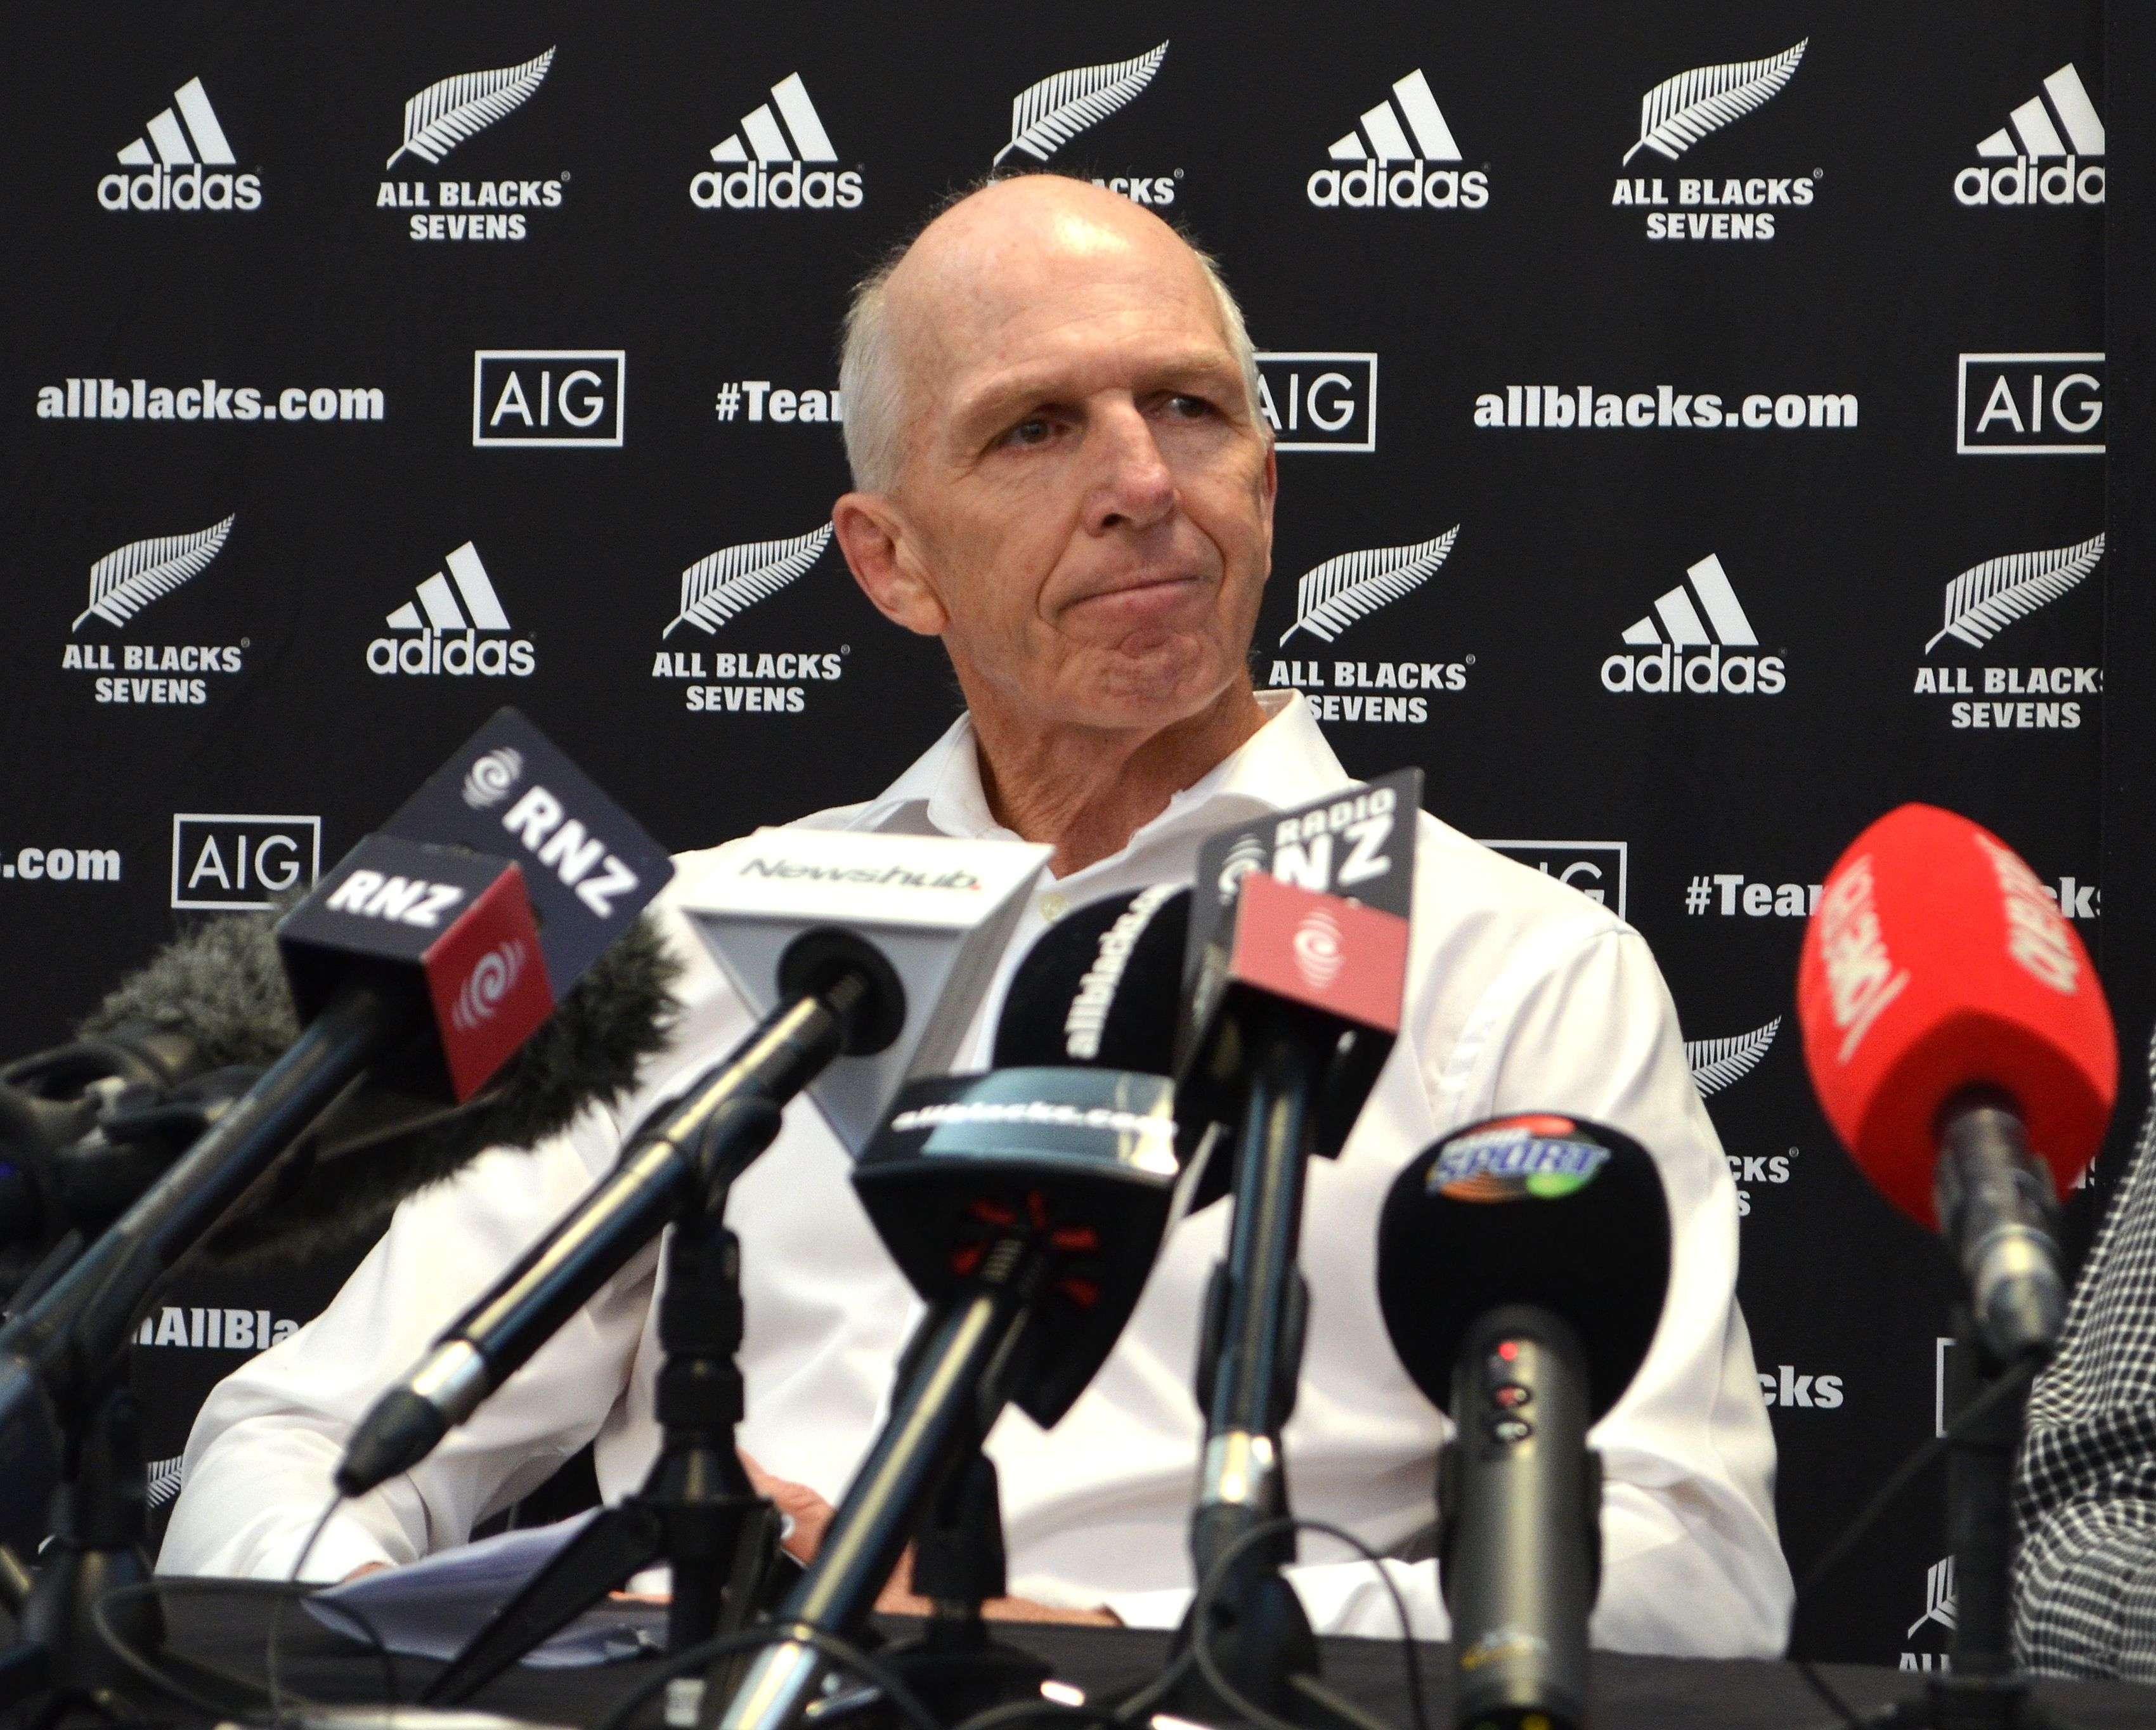 Legendary New Zealand sevens coach Gordon Tietjens has stepped down from his role following his team’s disappointing performance in Rio. Photo: AFP